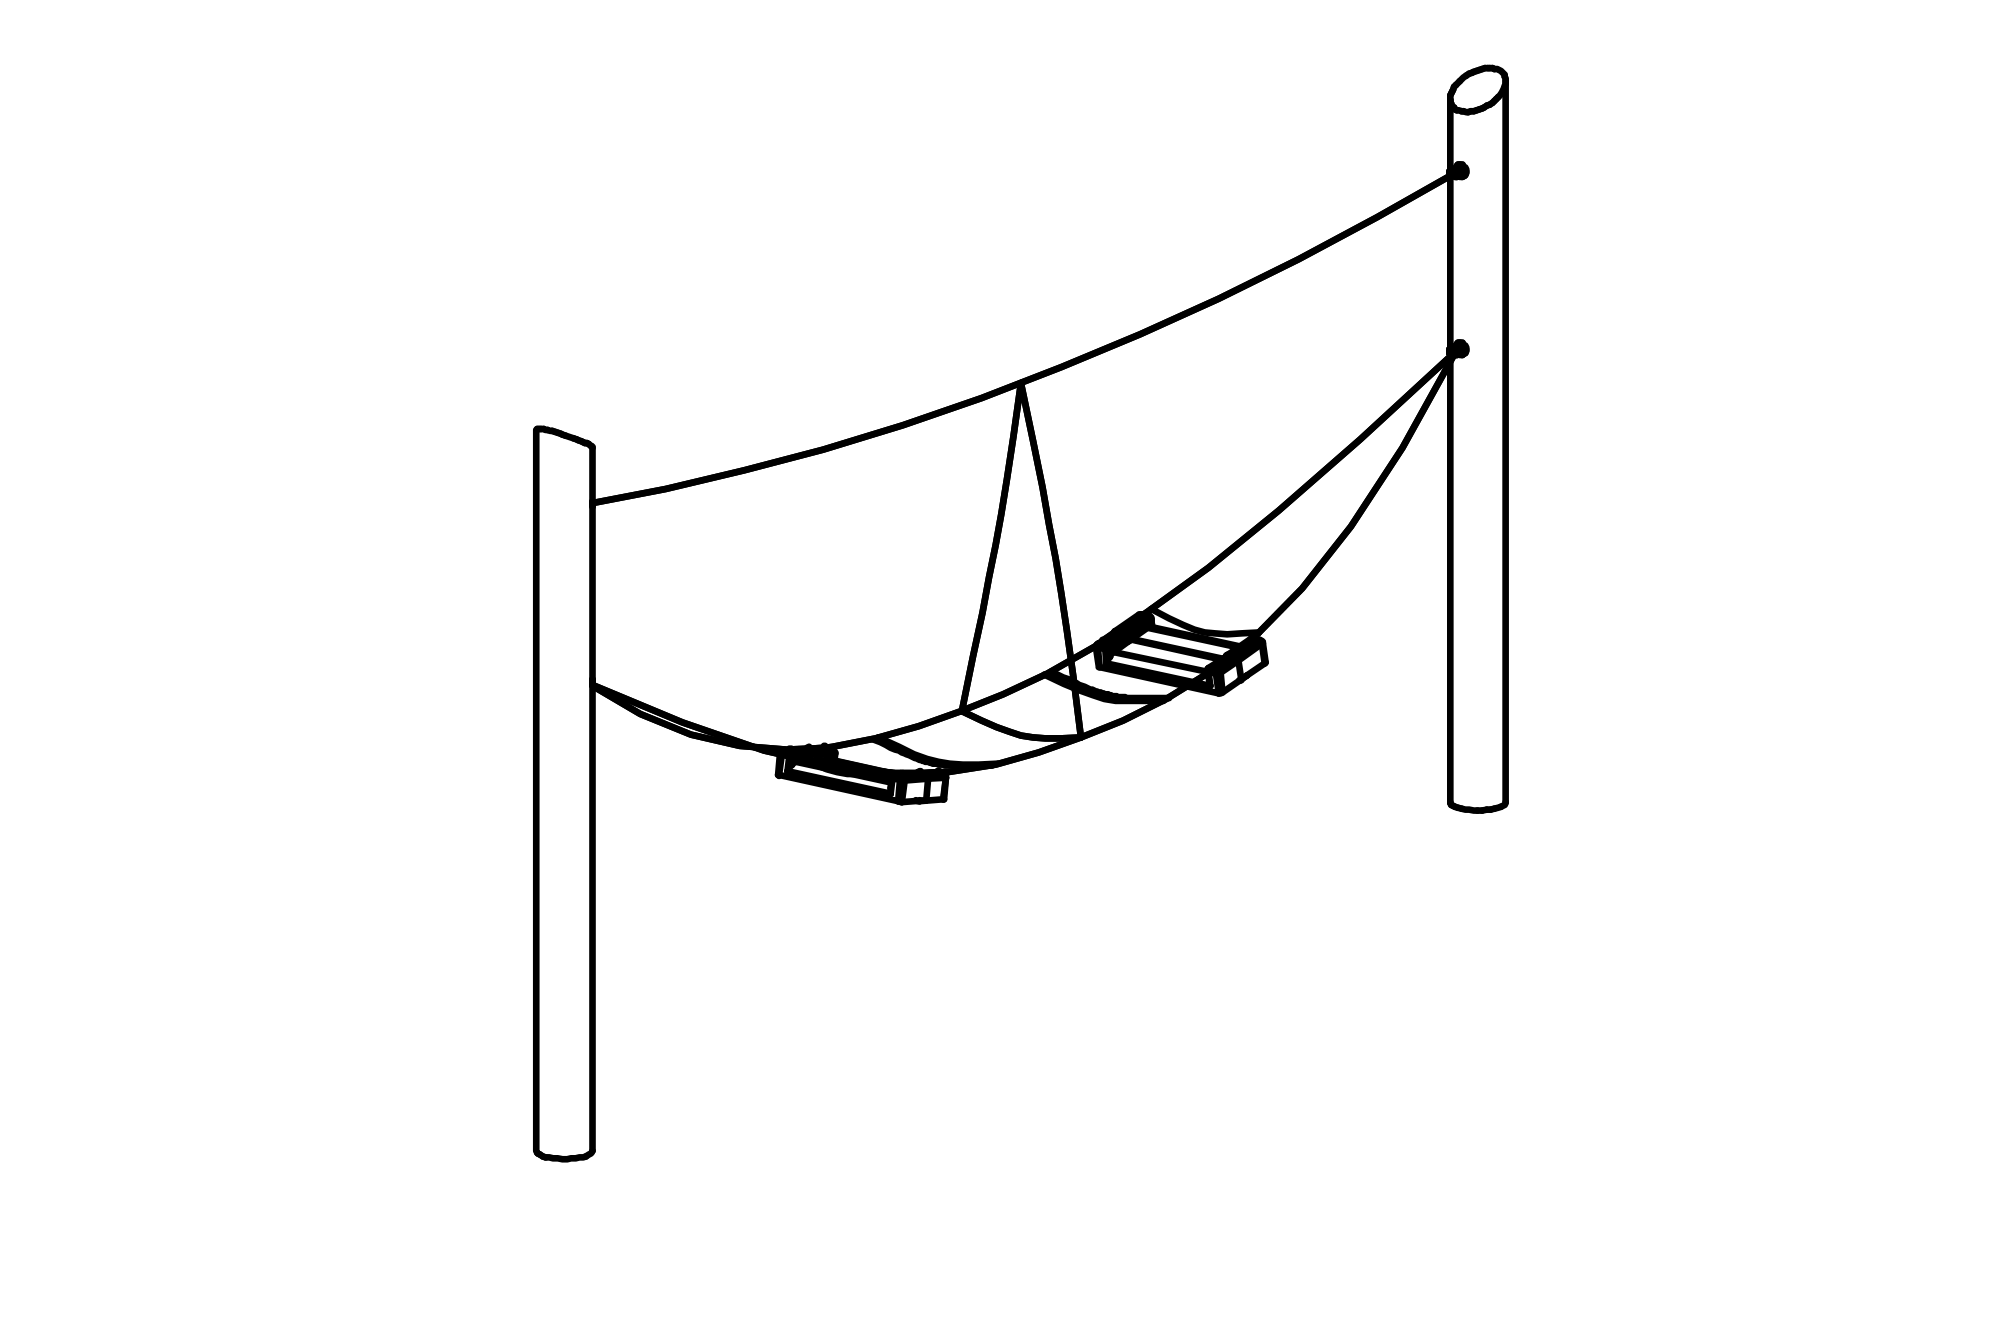 Double Hammock Seat, smaller mesh size has chains made of steel